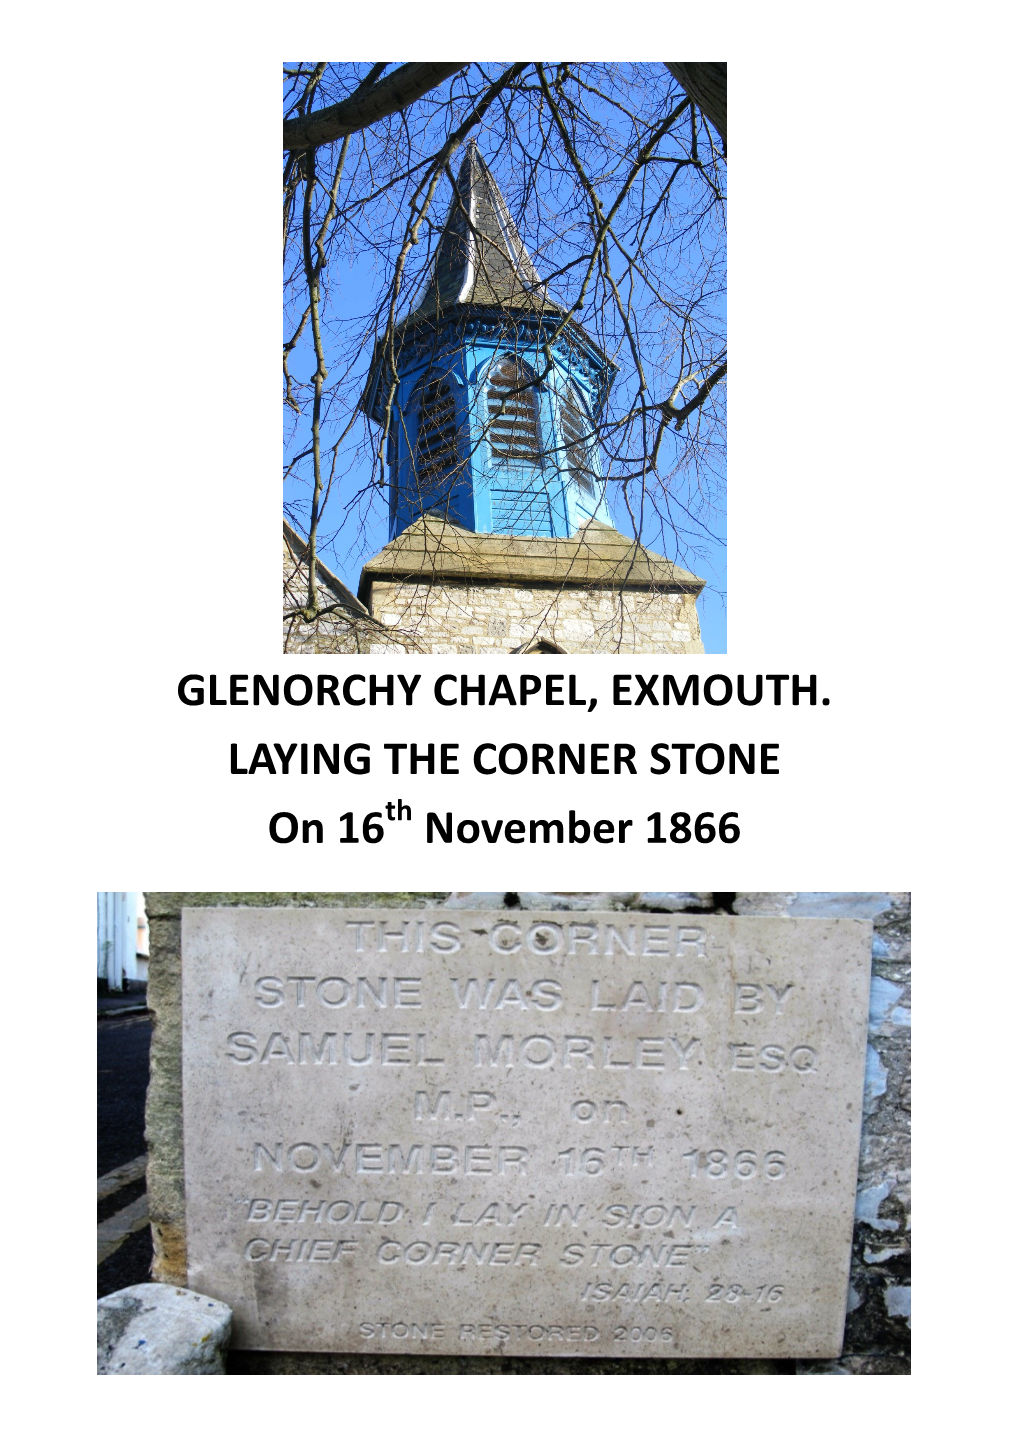 GLENORCHY CHAPEL, EXMOUTH. LAYING the CORNER STONE on 16Th November 1866